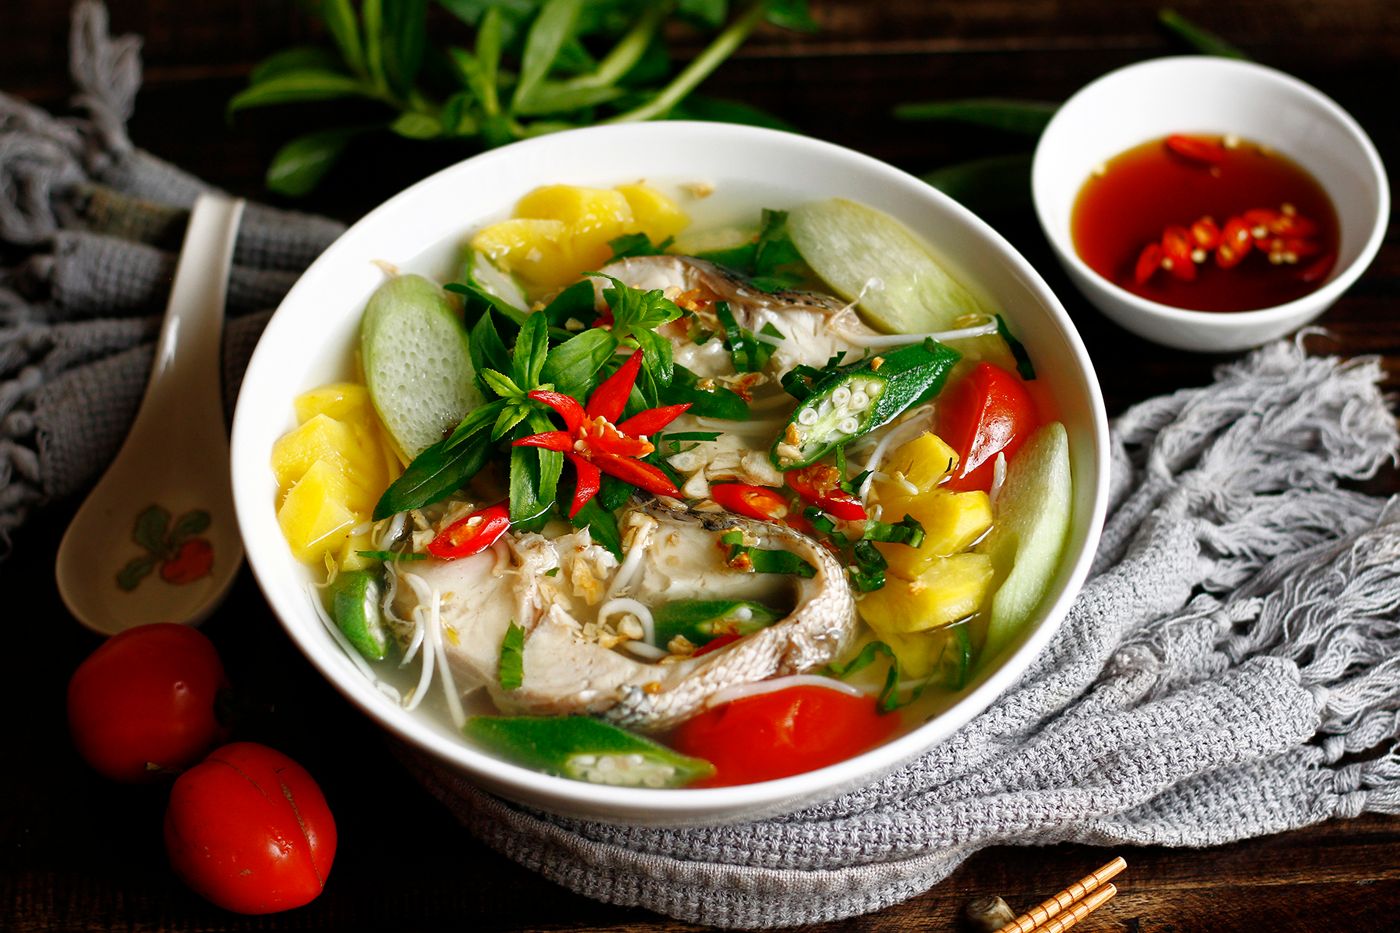 The delicious Sour Fish Soup with colorful vegetables. Photo by VN Express